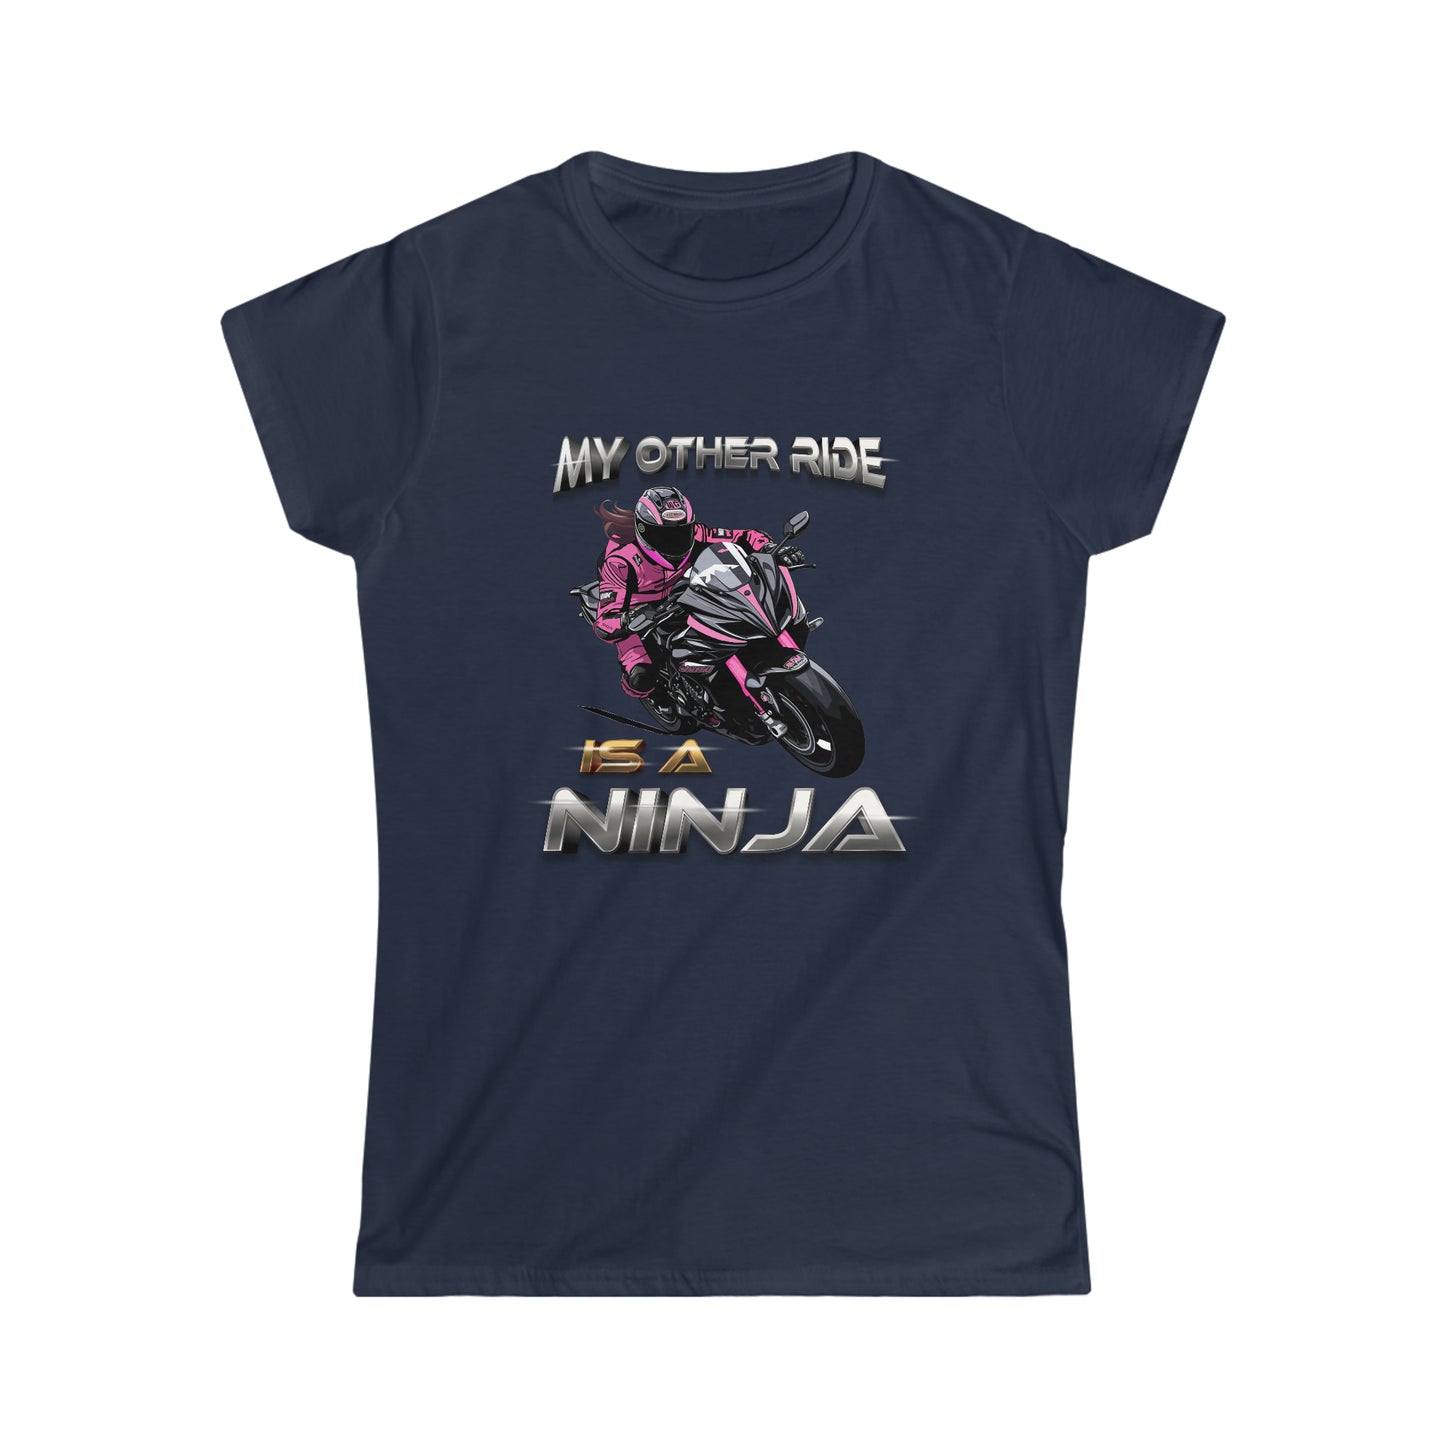 My Other Ride Is A Ninja - Women's Softstyle Tee